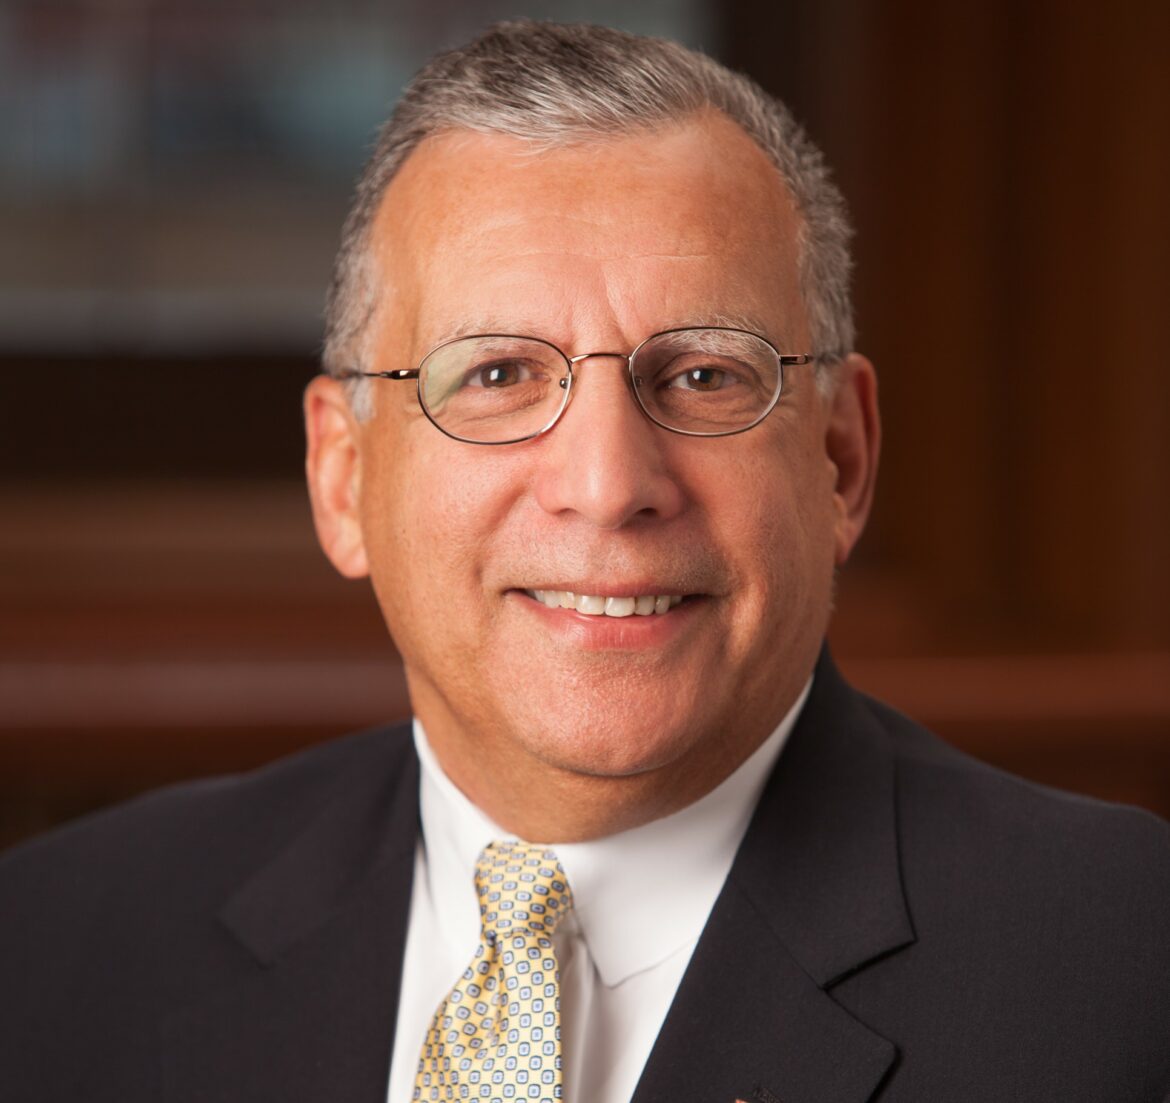 Tony Cracchiolo Announces Retirement from U.S. Bank After 52-Year Career